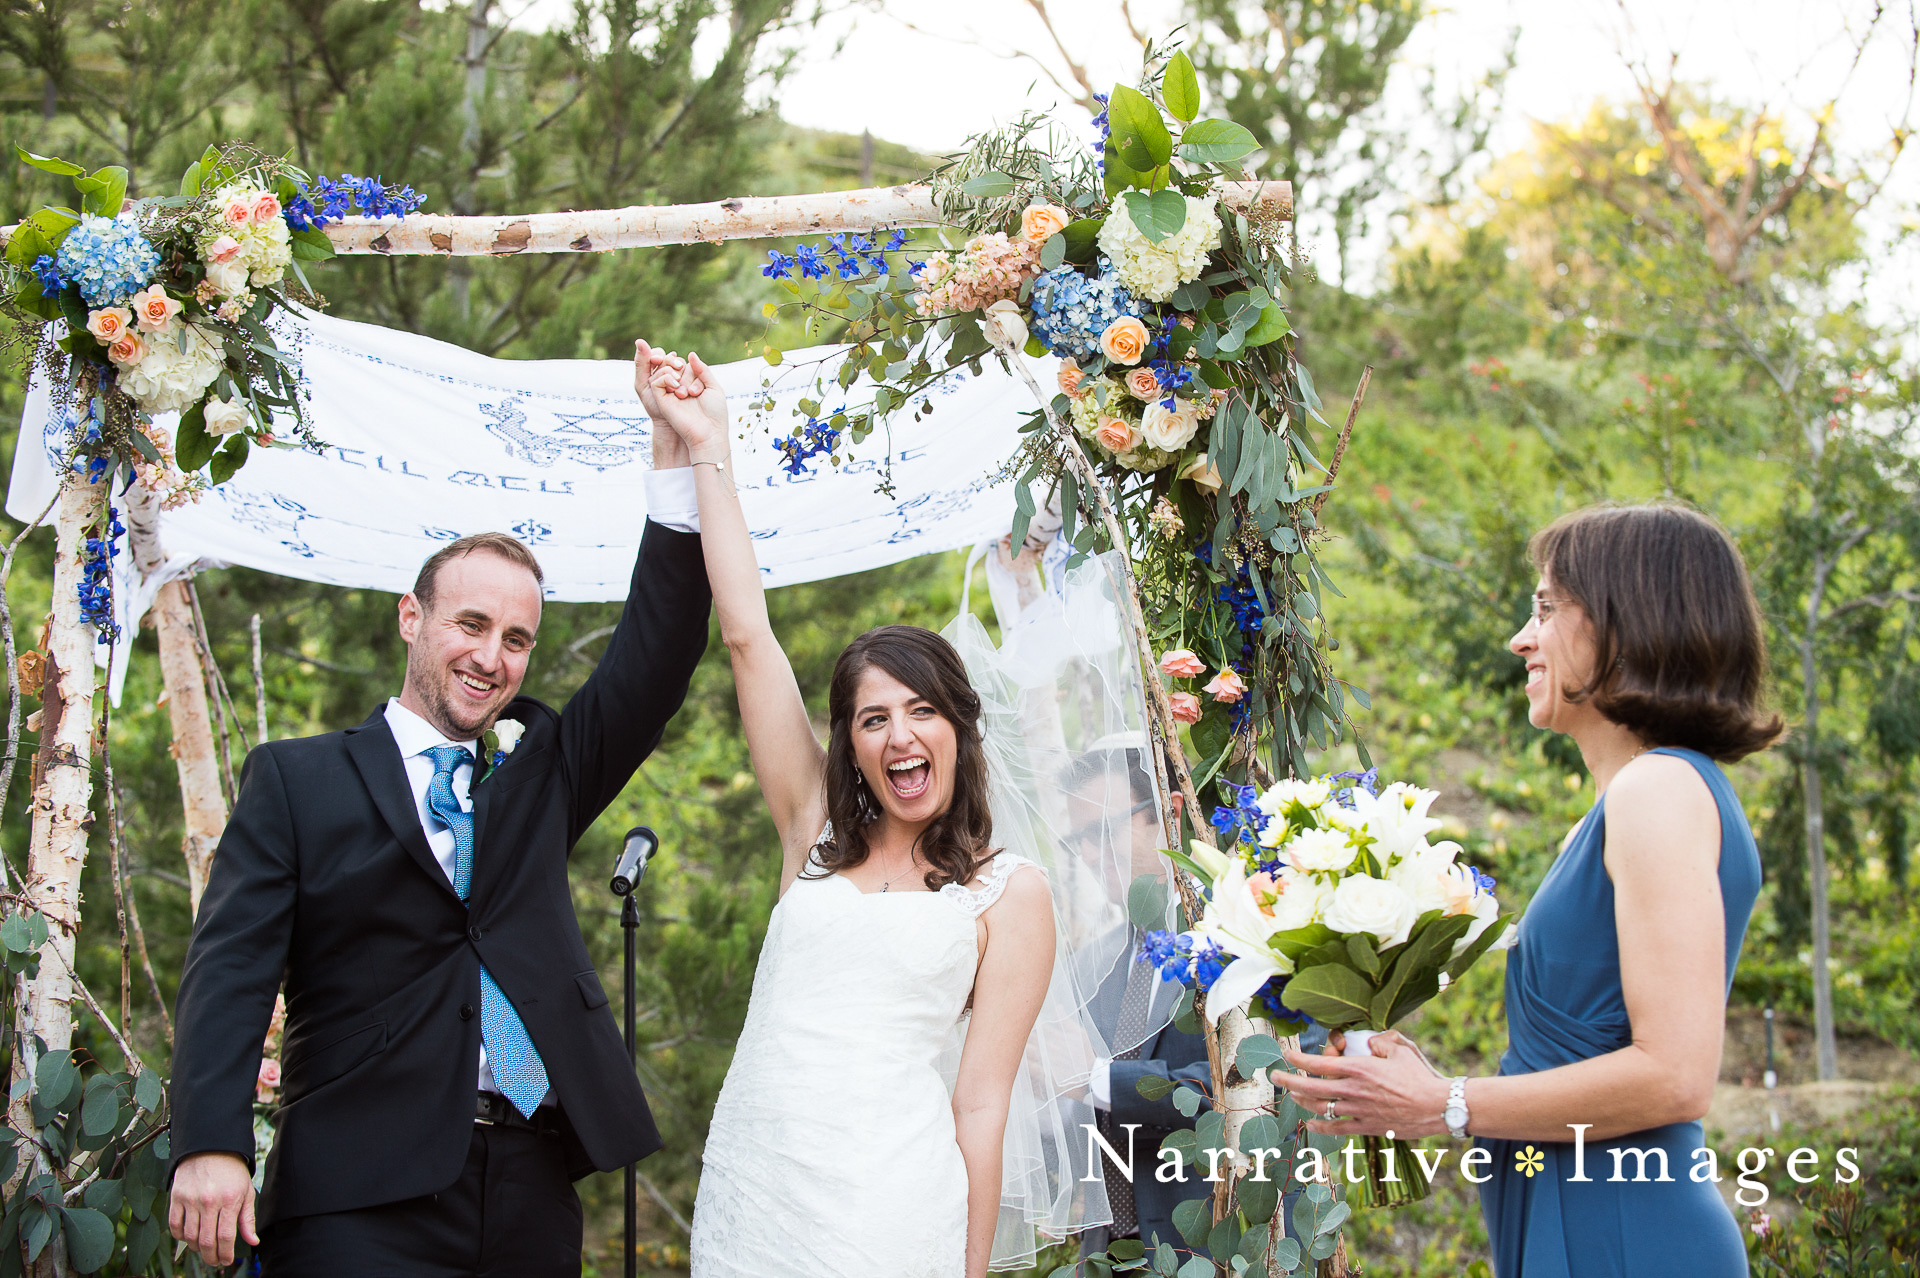 Bride and Groom celebrate after their vows during Jewish wedding ceremony at Japanese Friendship Gardens in Balboa Park